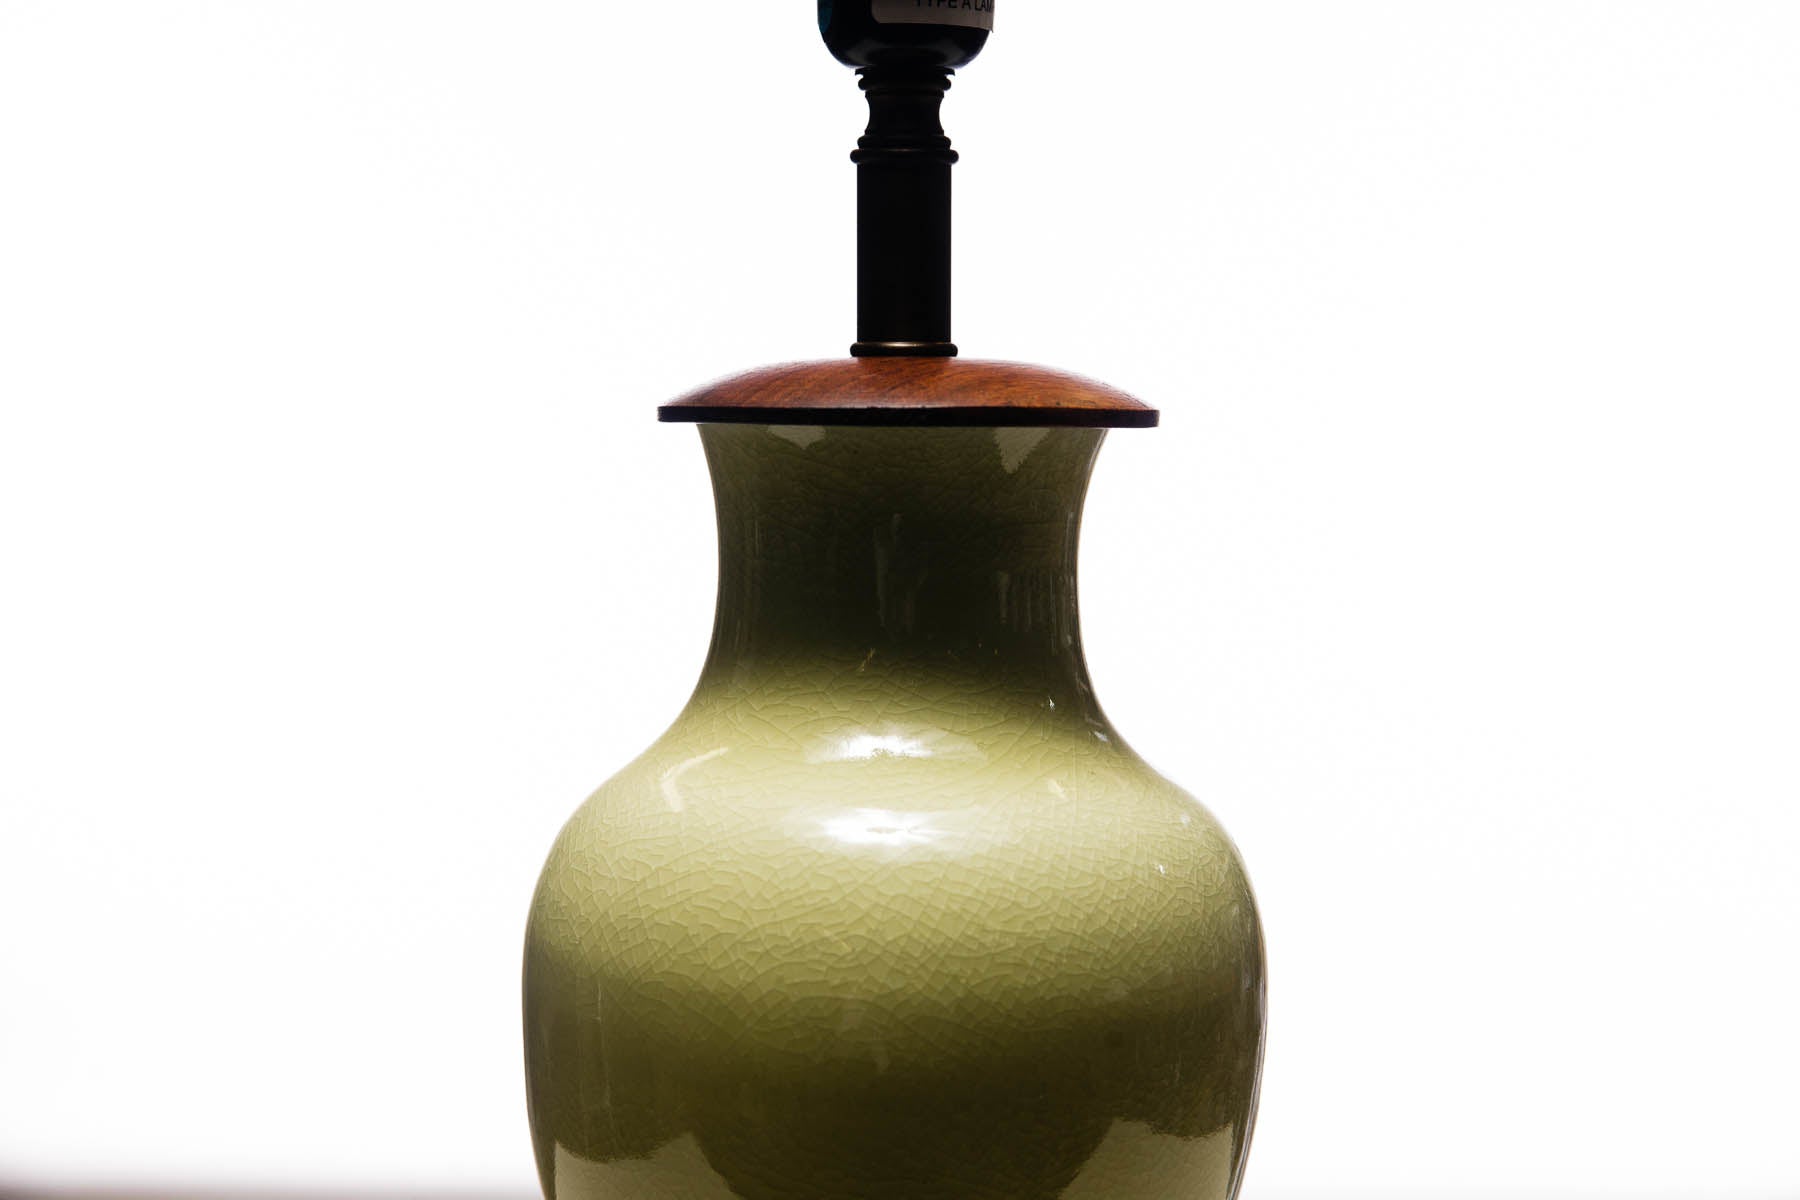 Legacy Gabrielle Baluster Porcelain Lamp in Avocado with Rosewood Base